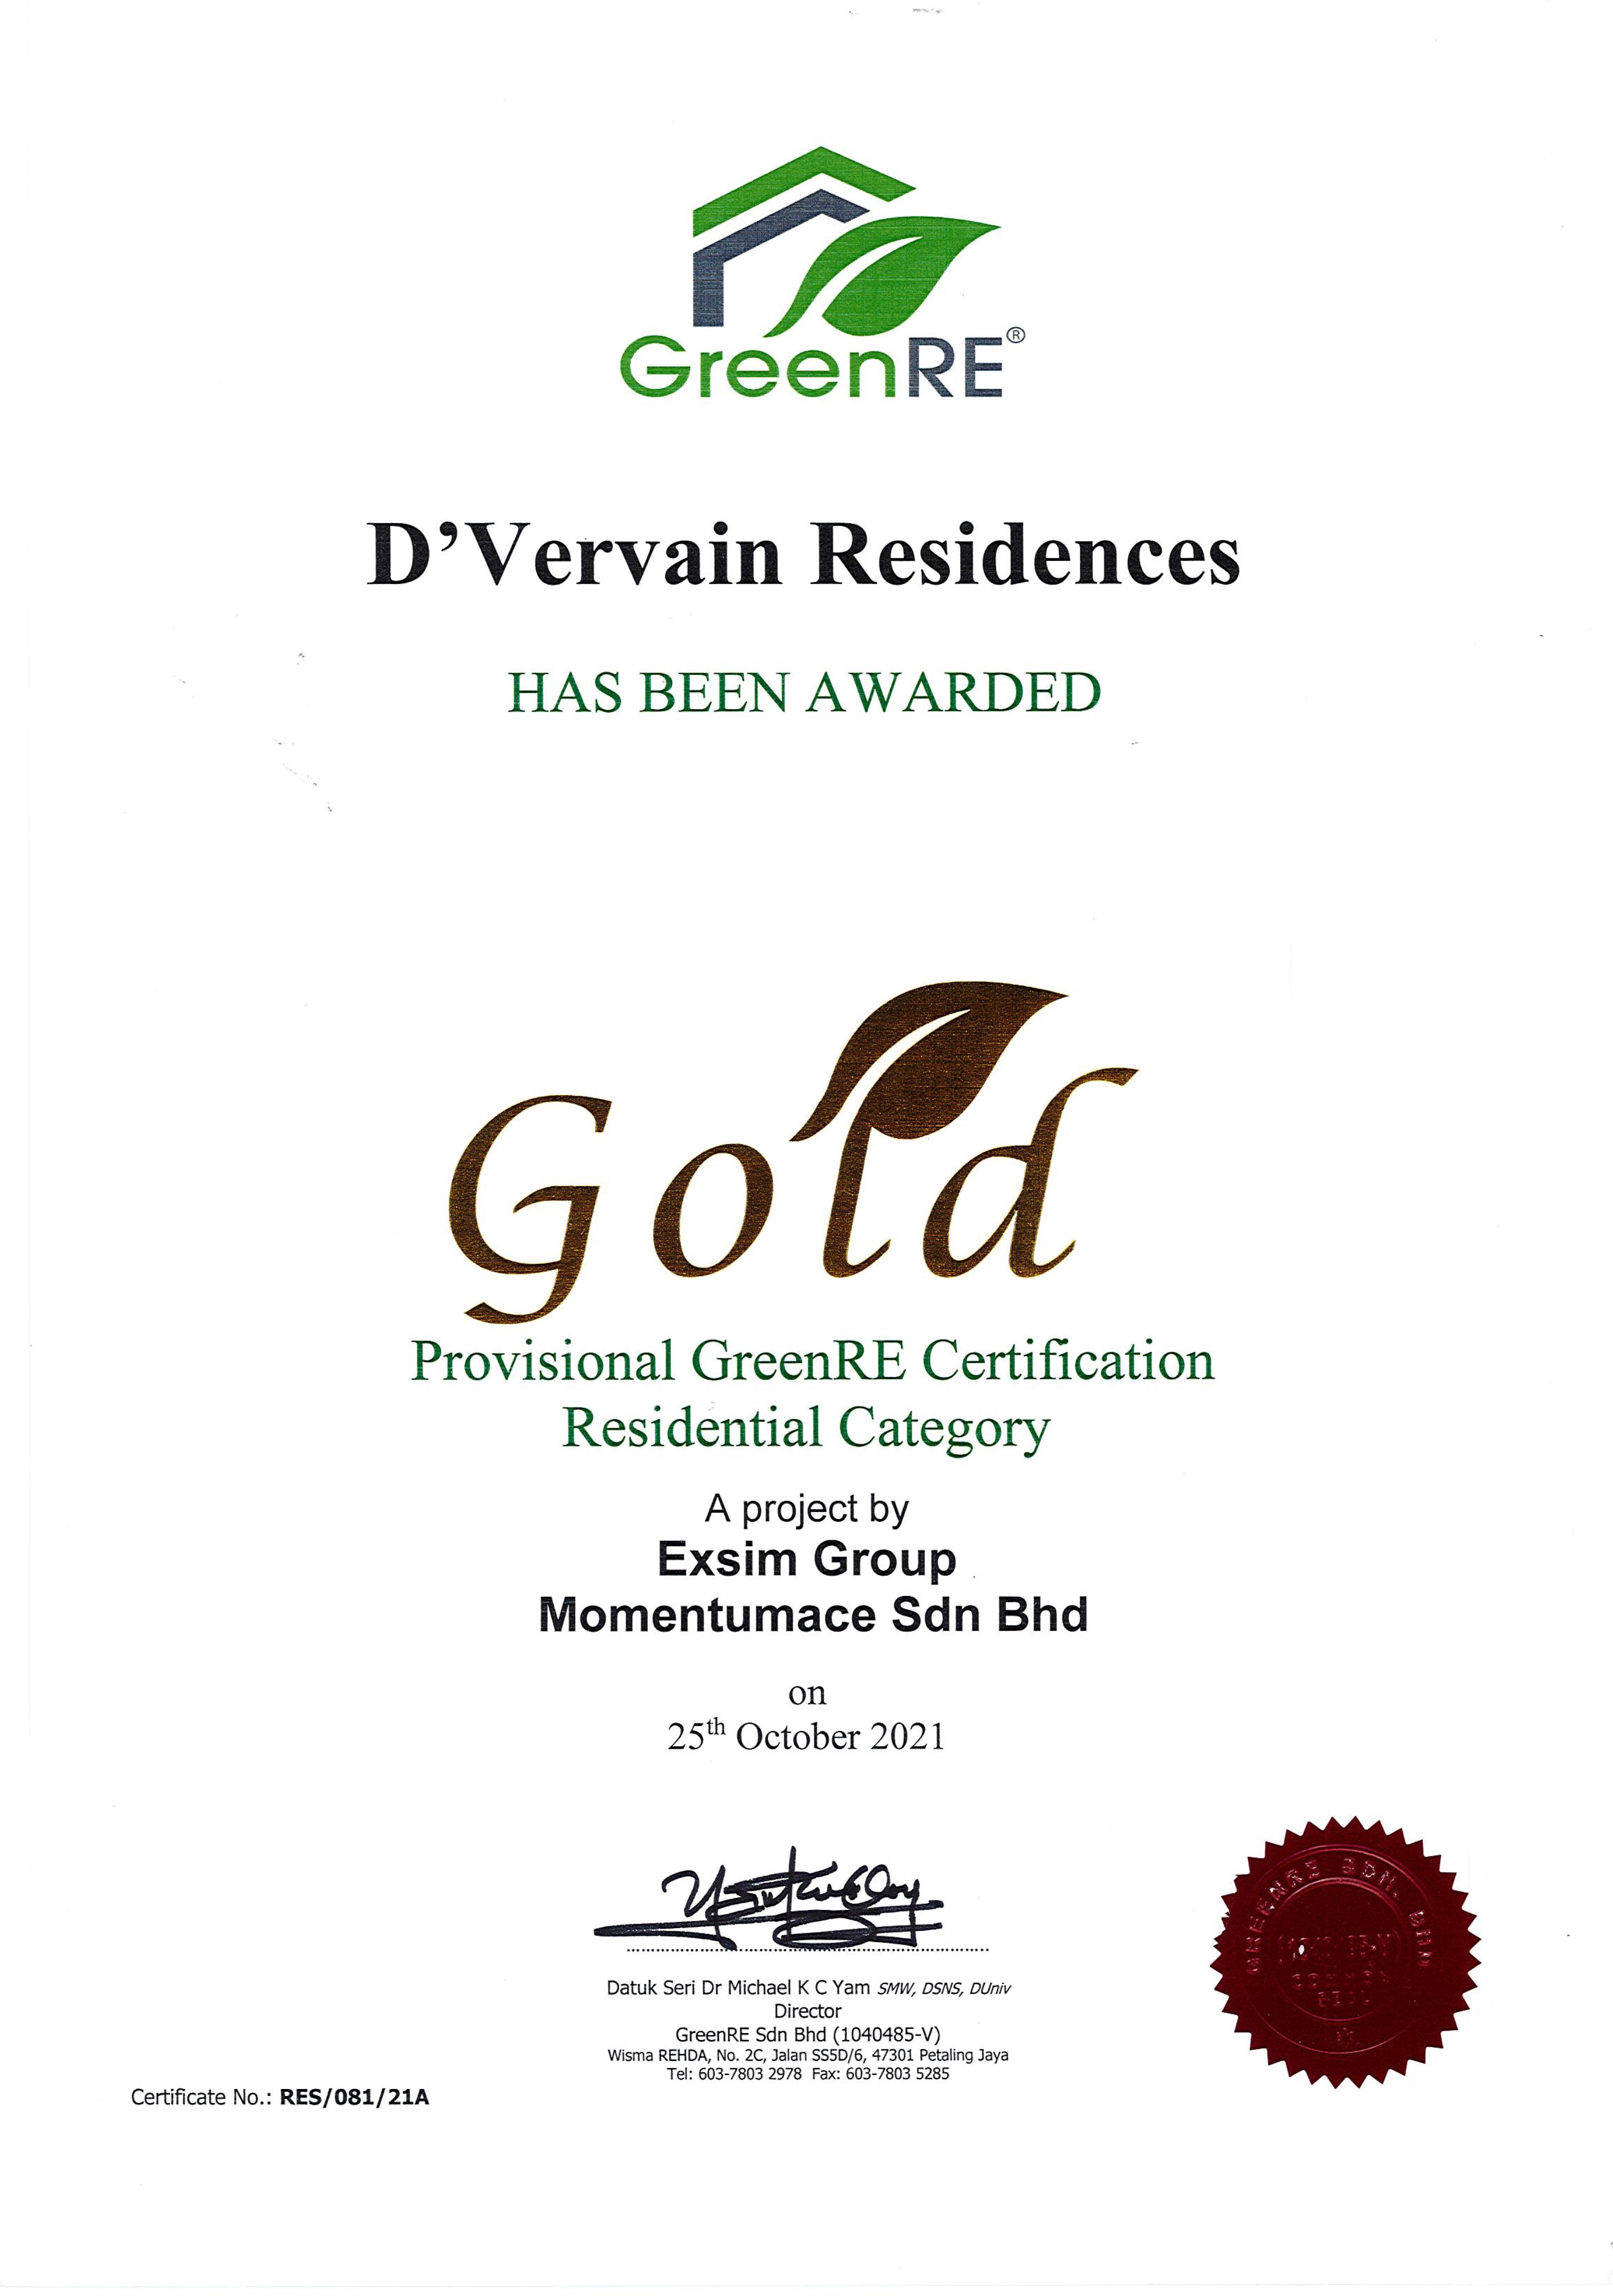 D'VERVAIN RESIDENCES GOLD PROVISIONAL GREENRE